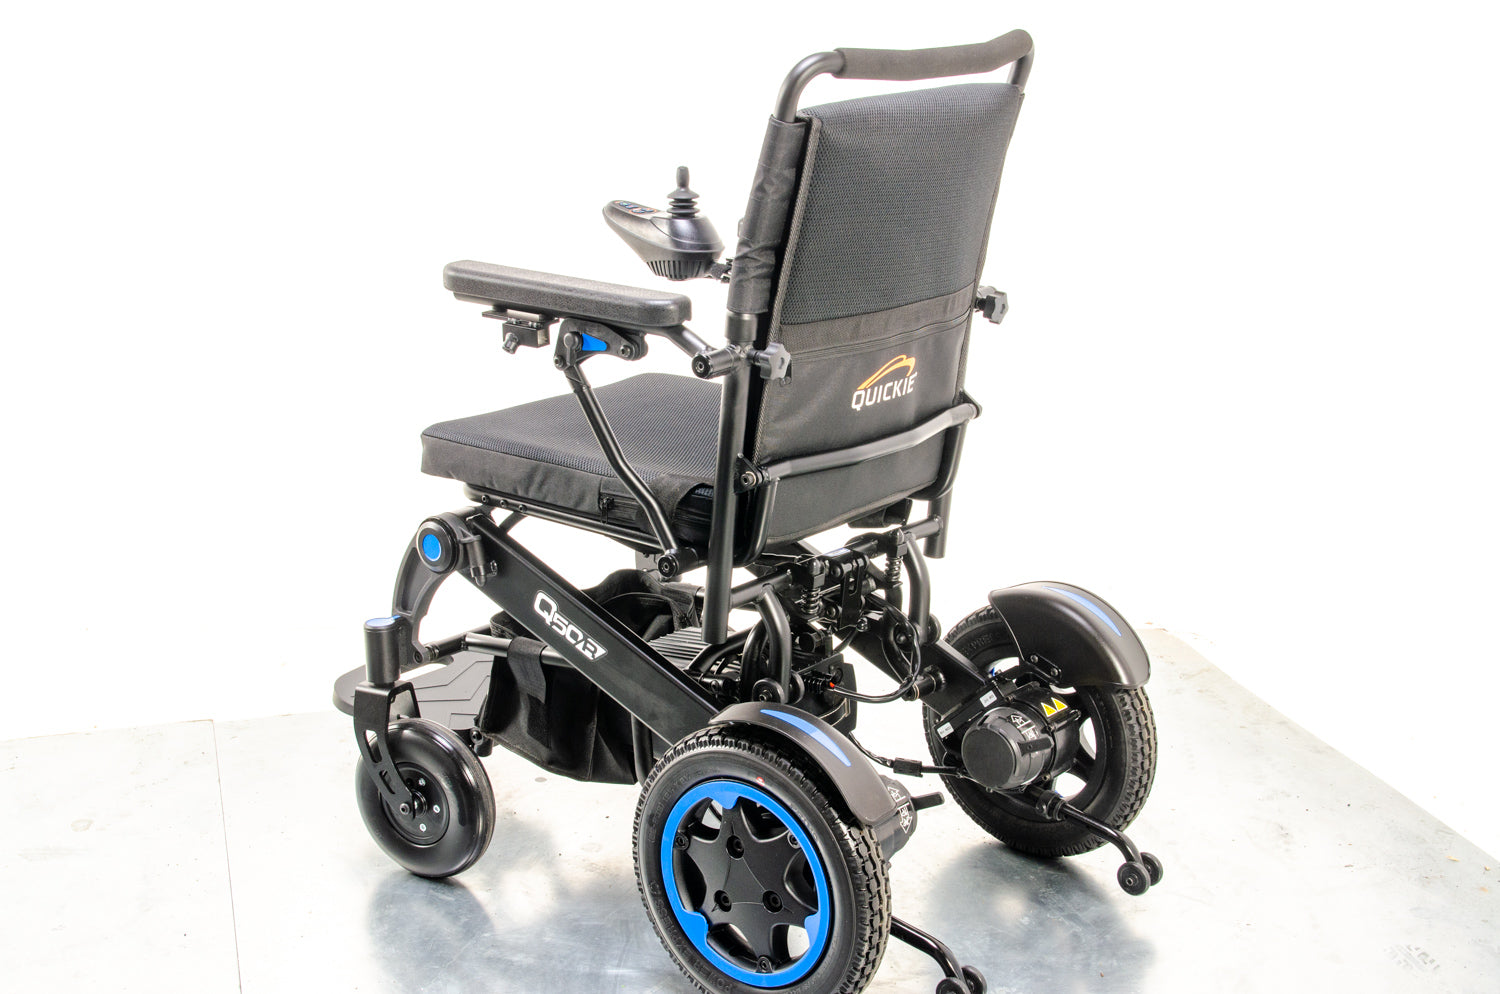 Quickie Q50R Folding Electric Wheelchair Sunrise Medical Used Powerchair Lithium Lightweight